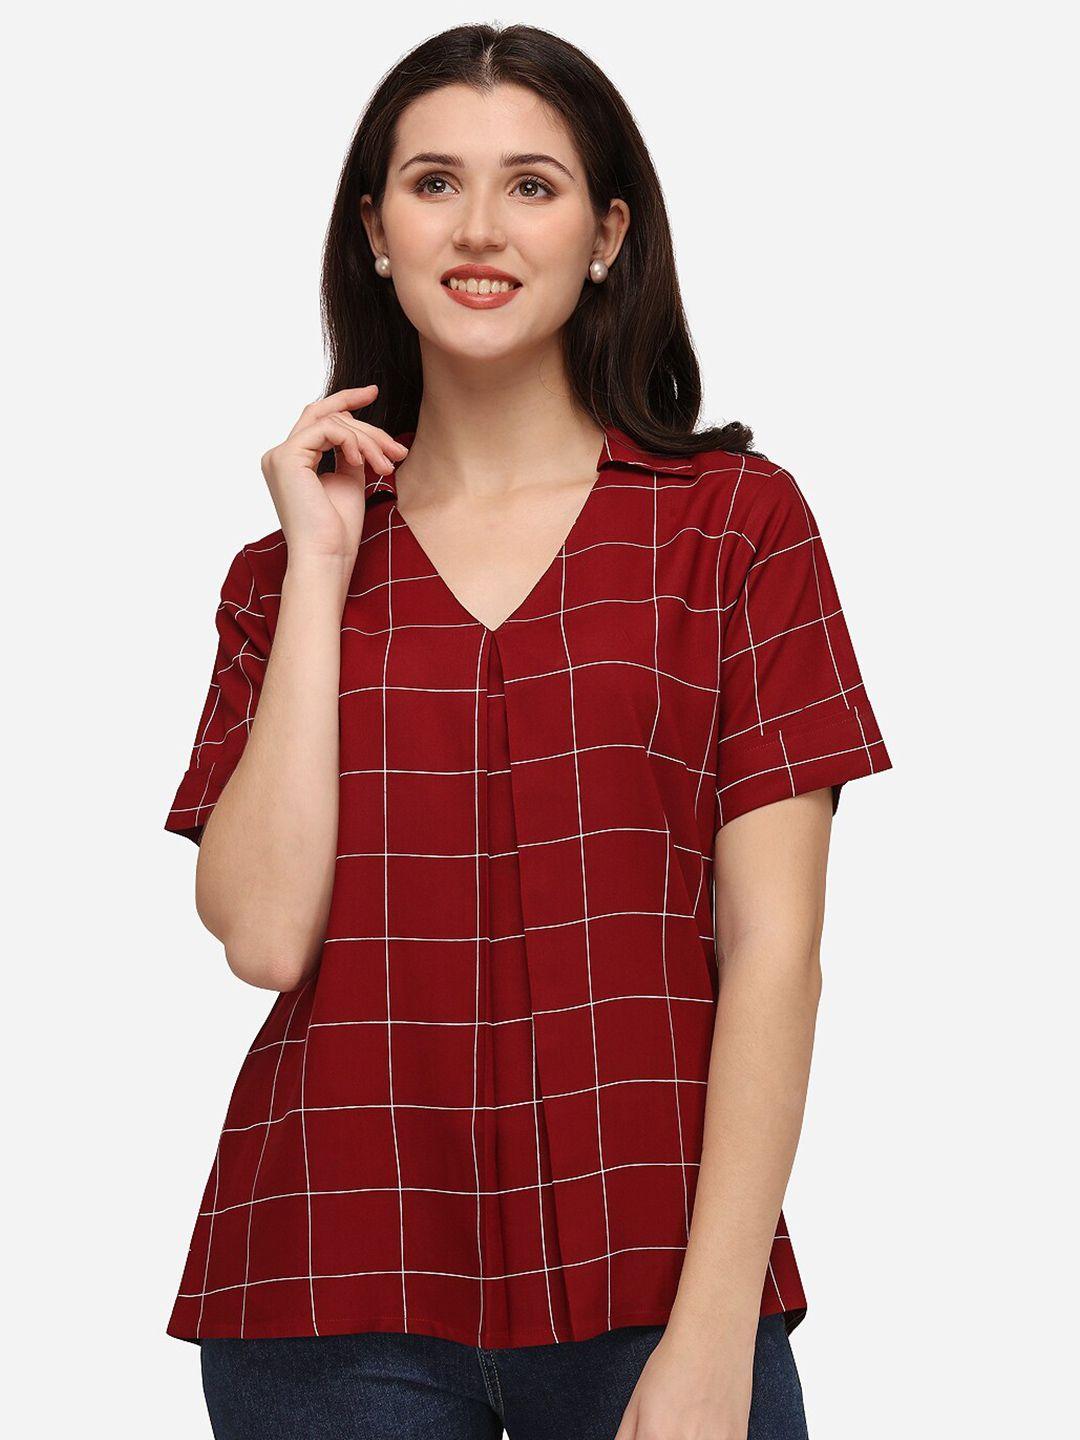 smarty pants maroon & off white checked top